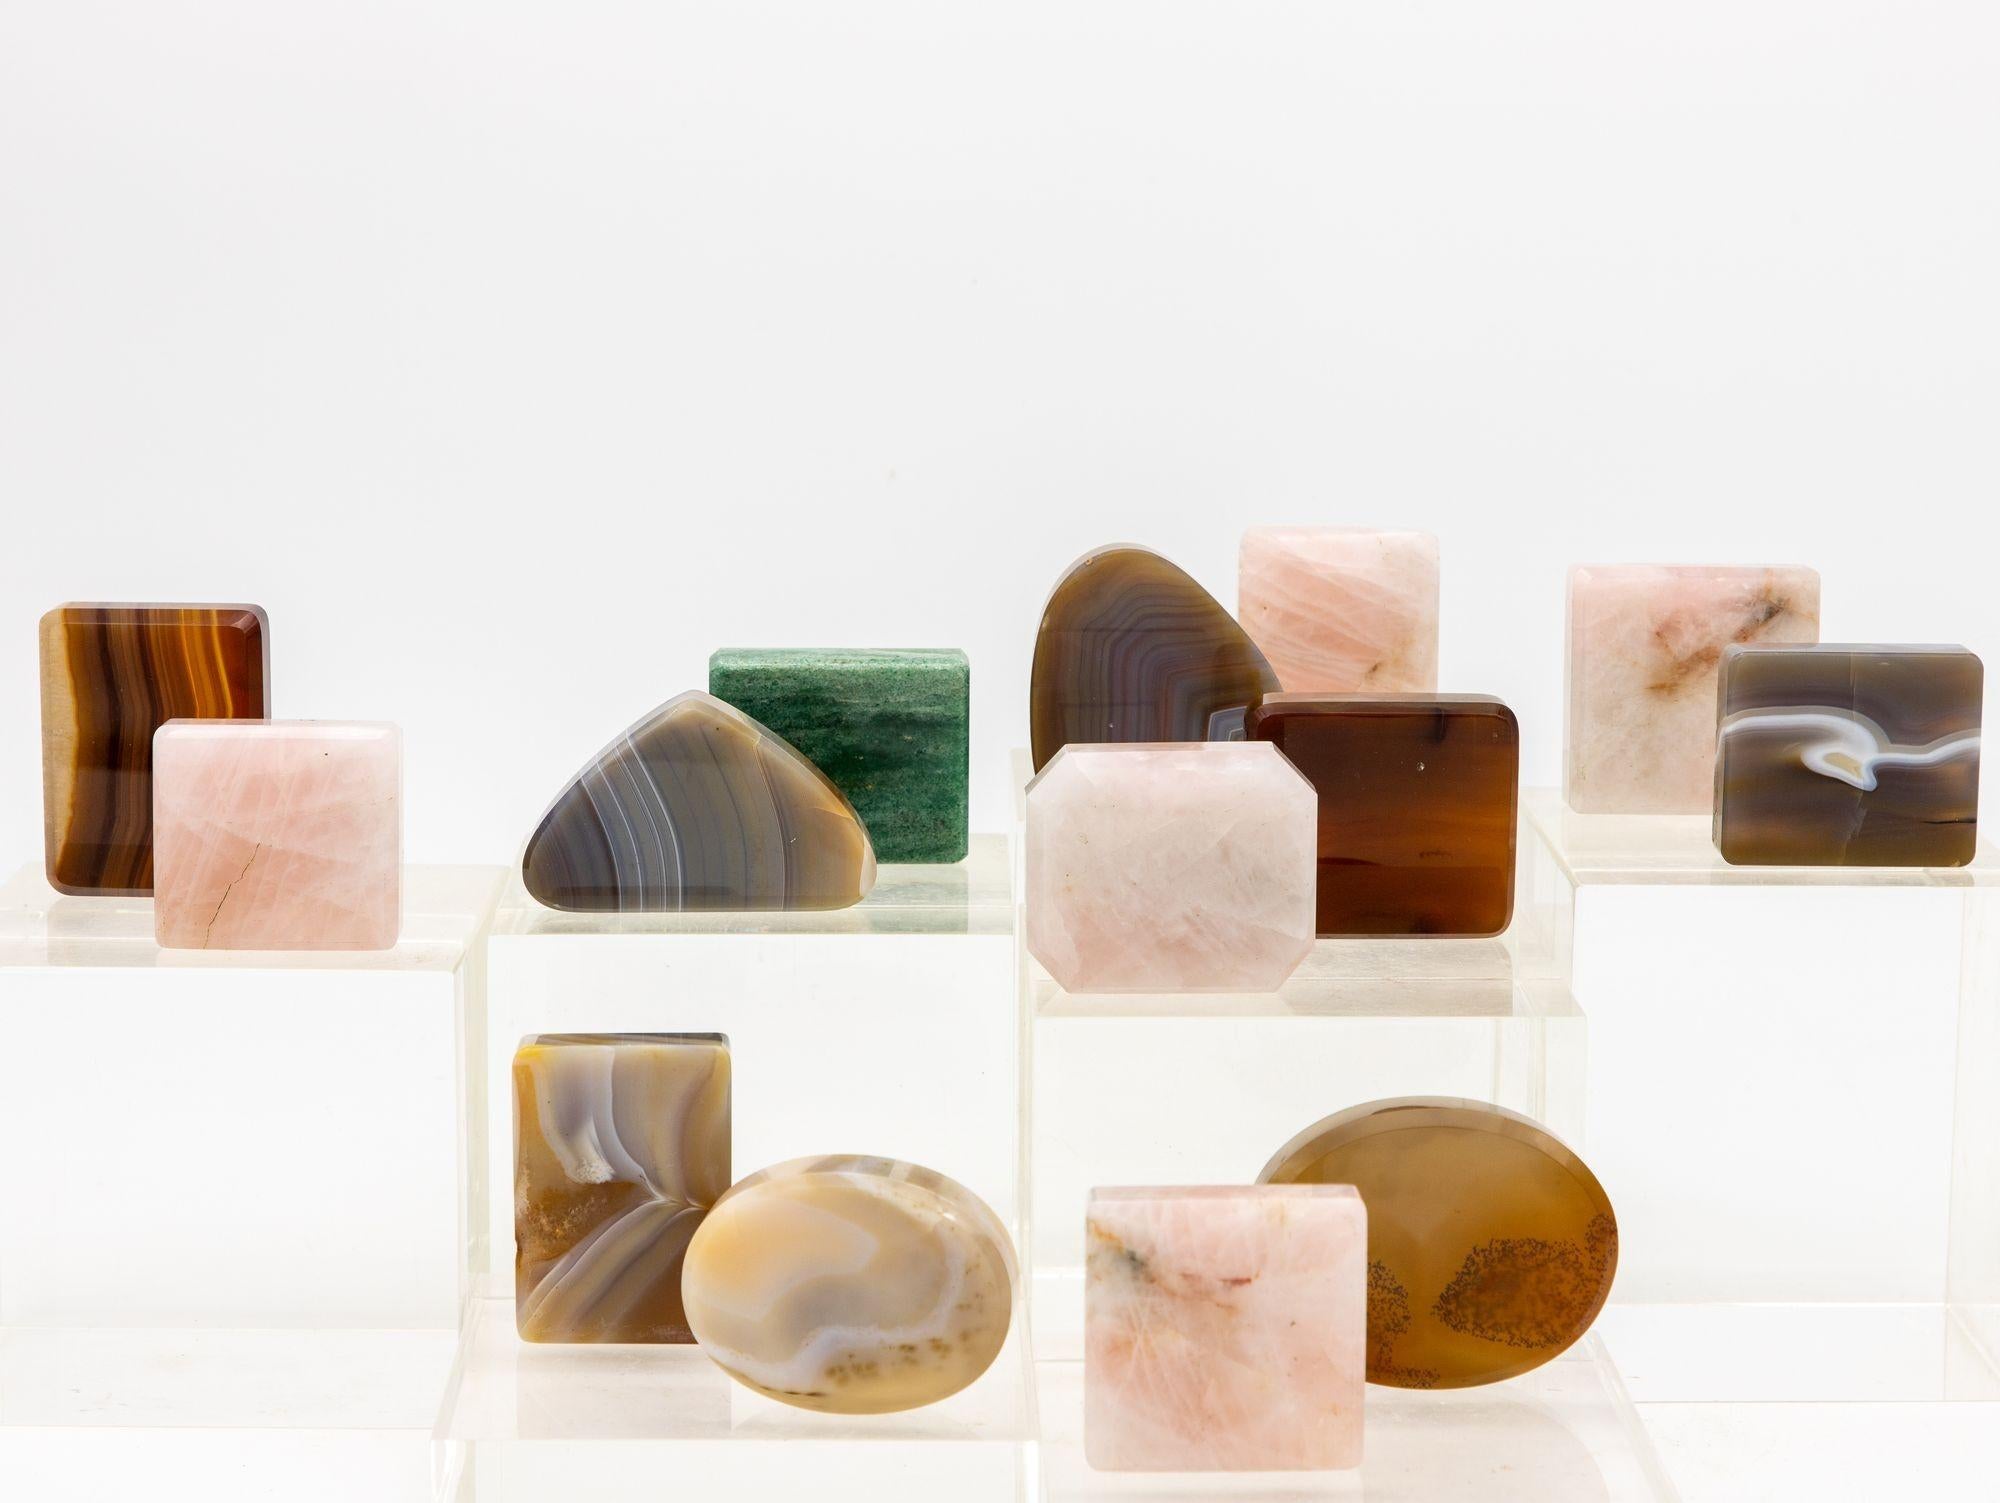 This exquisite collection features 14 mesmerizing polished stone specimens sourced from the captivating landscapes of Italy. Each stone tells a unique tale of geological artistry, showcasing Italy's rich natural heritage. These polished stones evoke